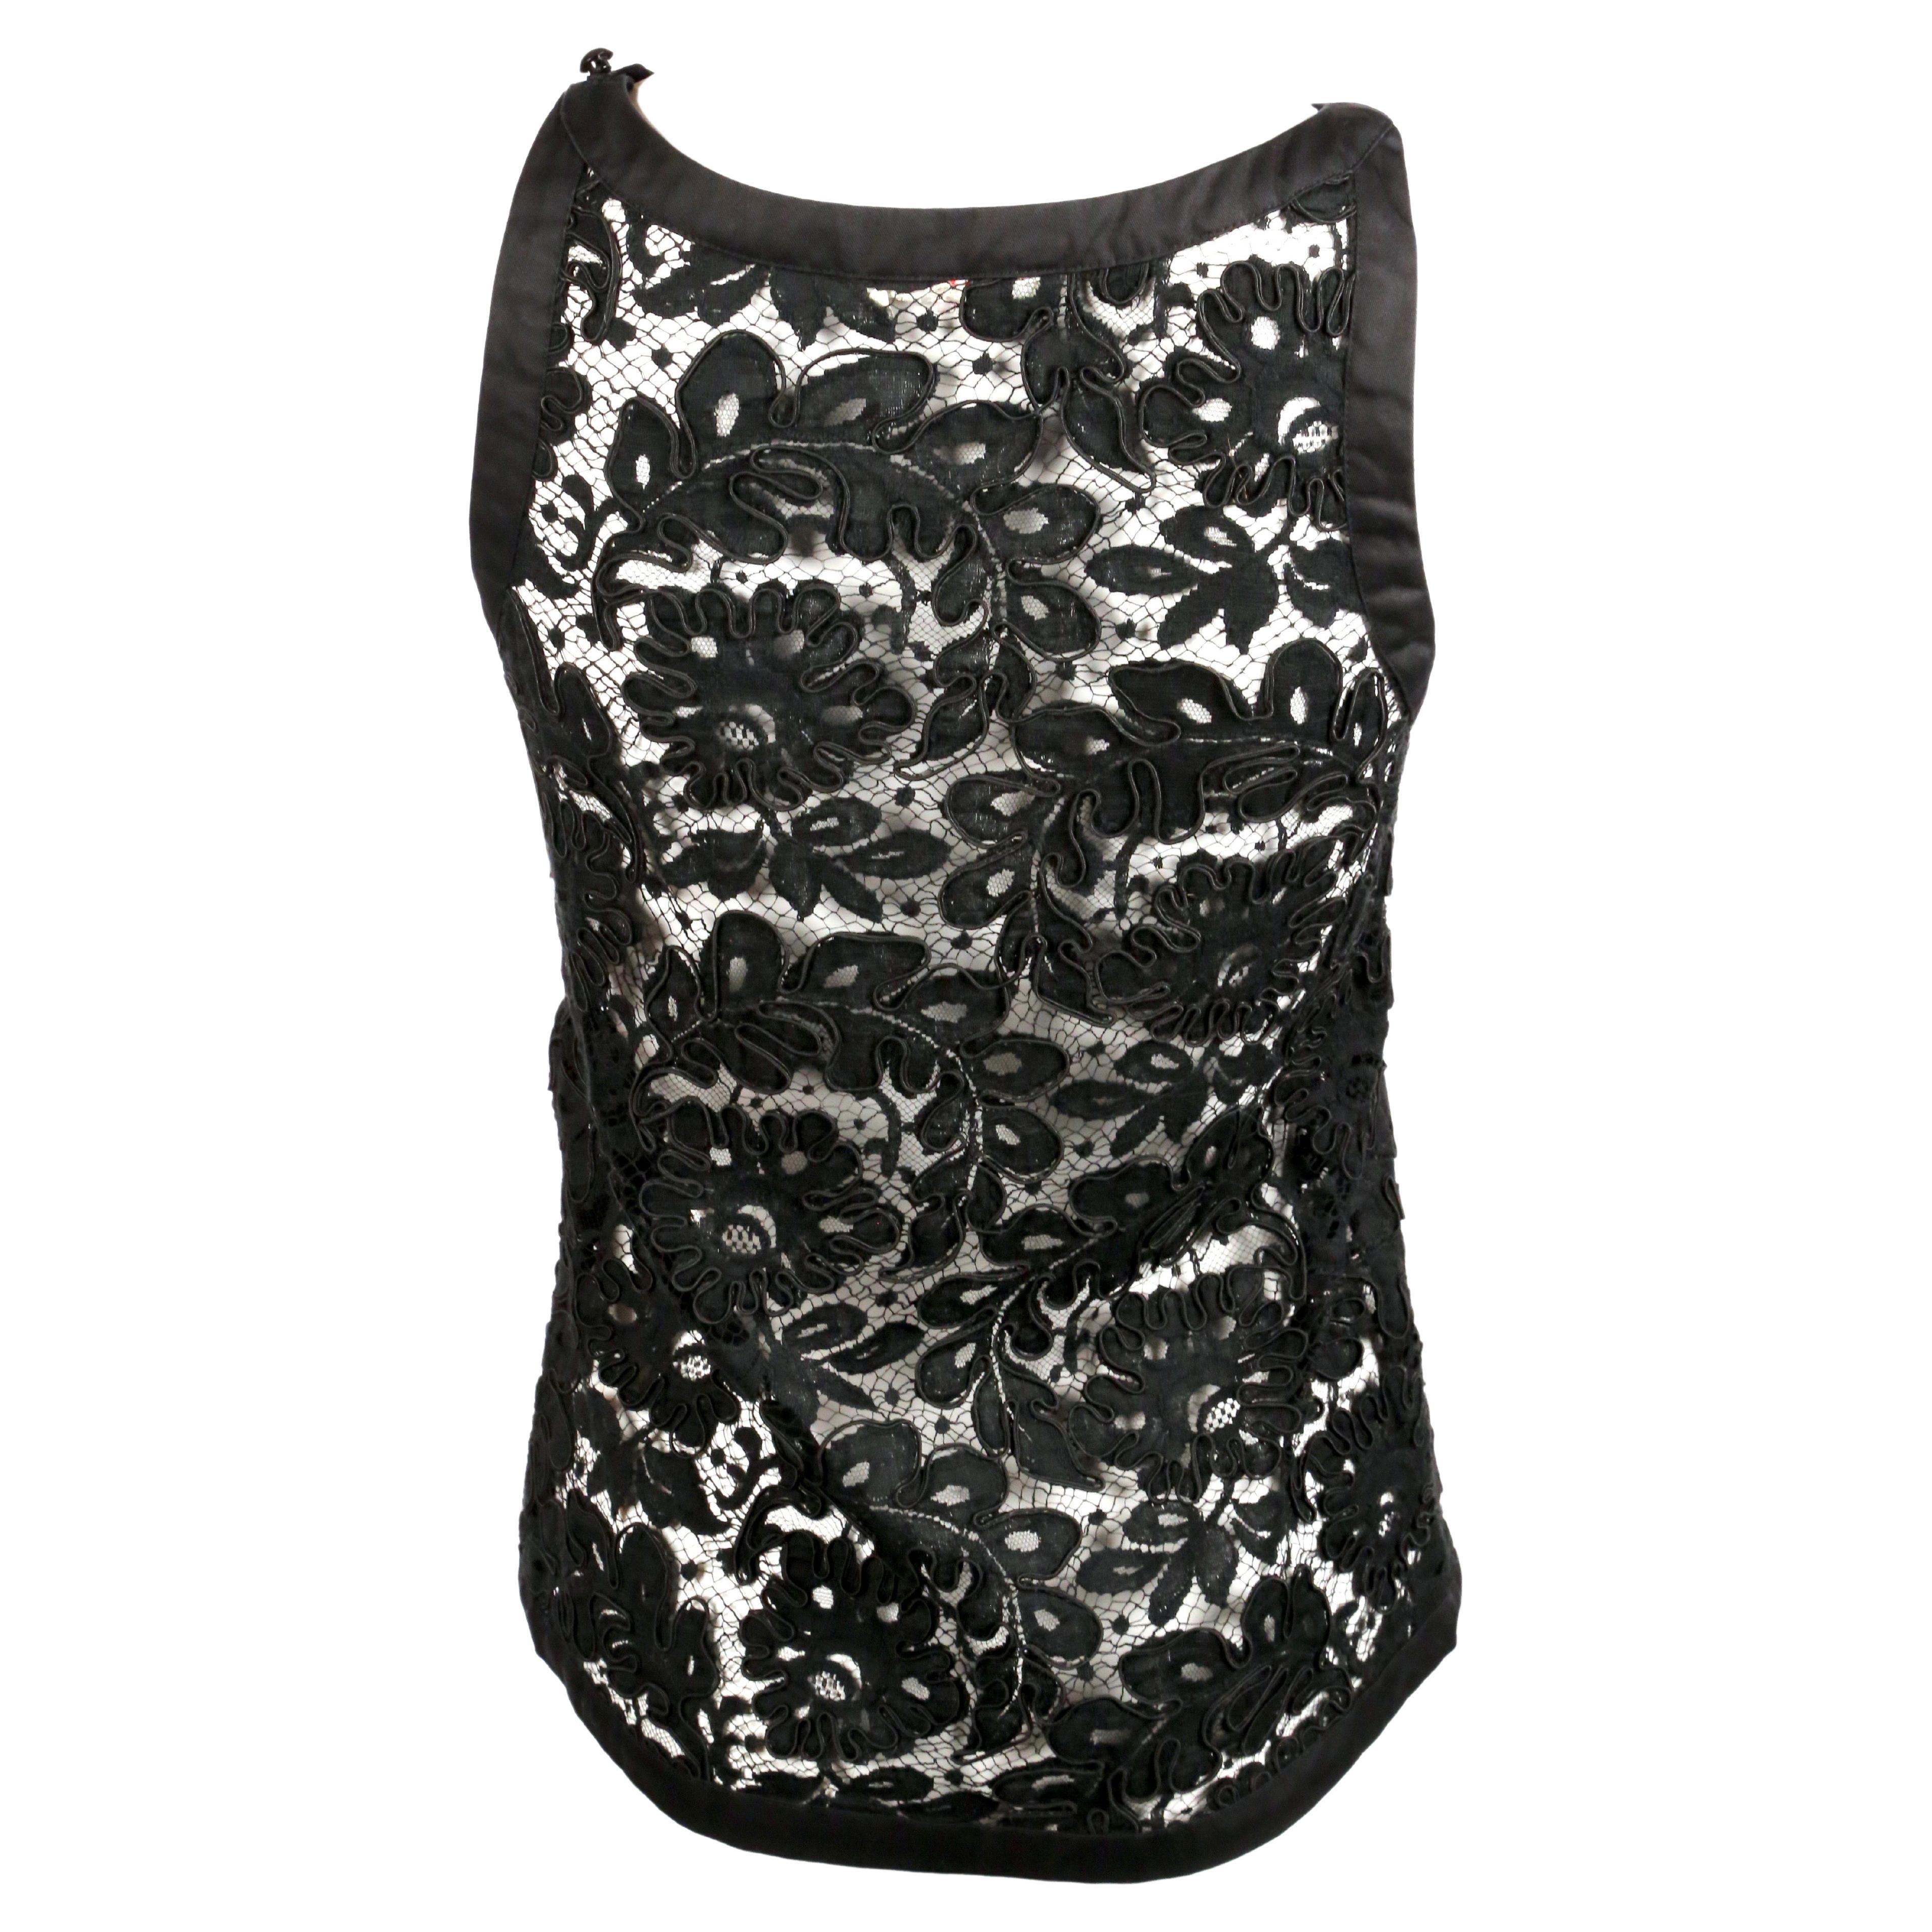 Jet-black, lace tank with cotton trim from Yves Saint Laurent dating to the 1980's. French size 34. Fits a US size 2. Approximate measurements: bust 32